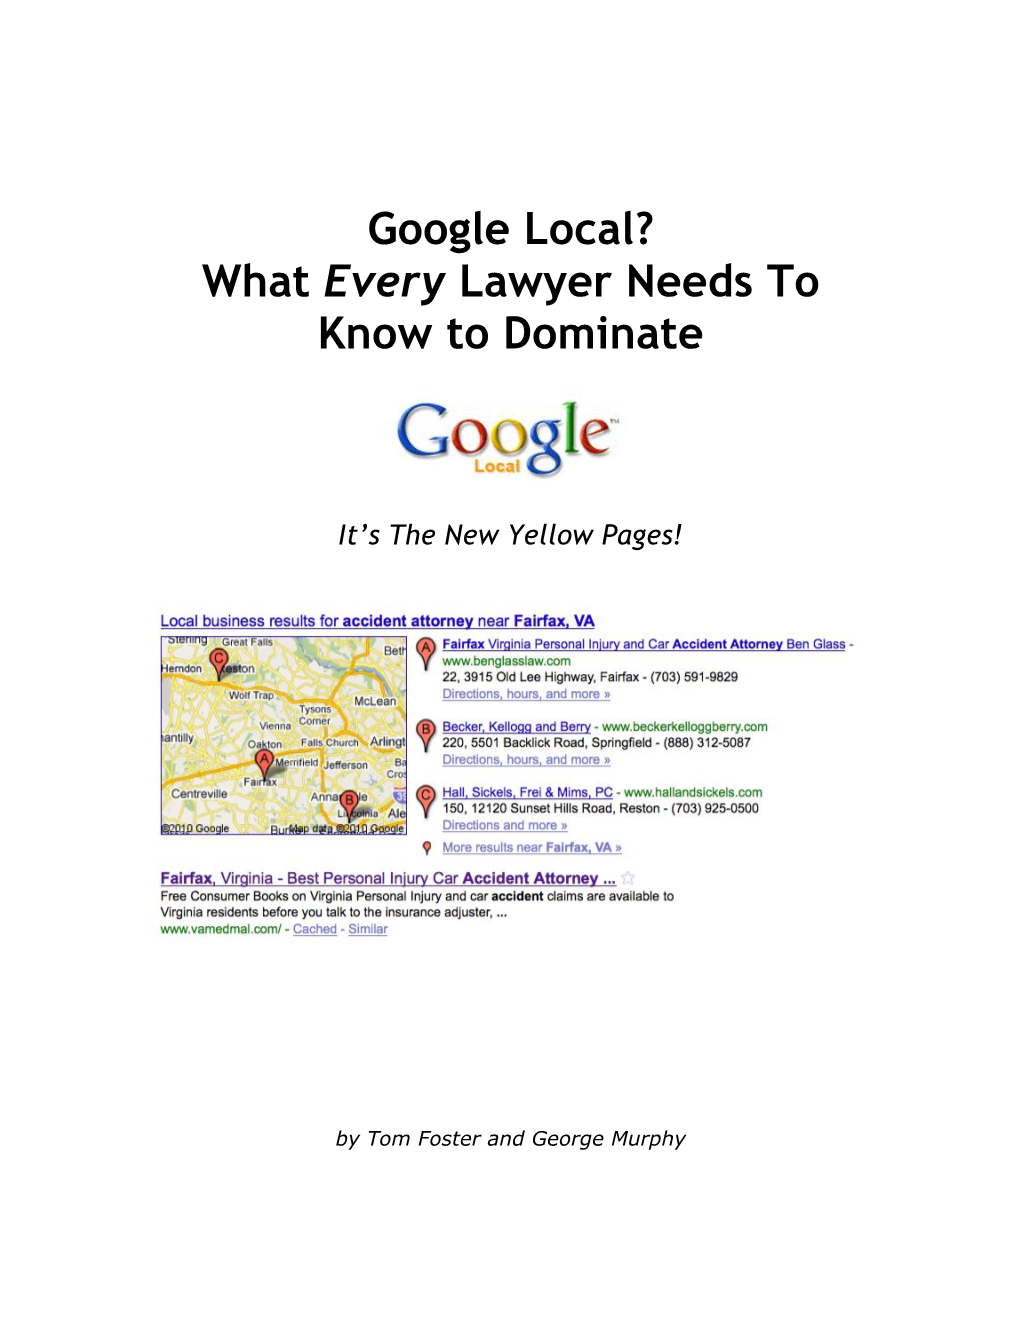 What You Need to Know About Google Local Edited V4